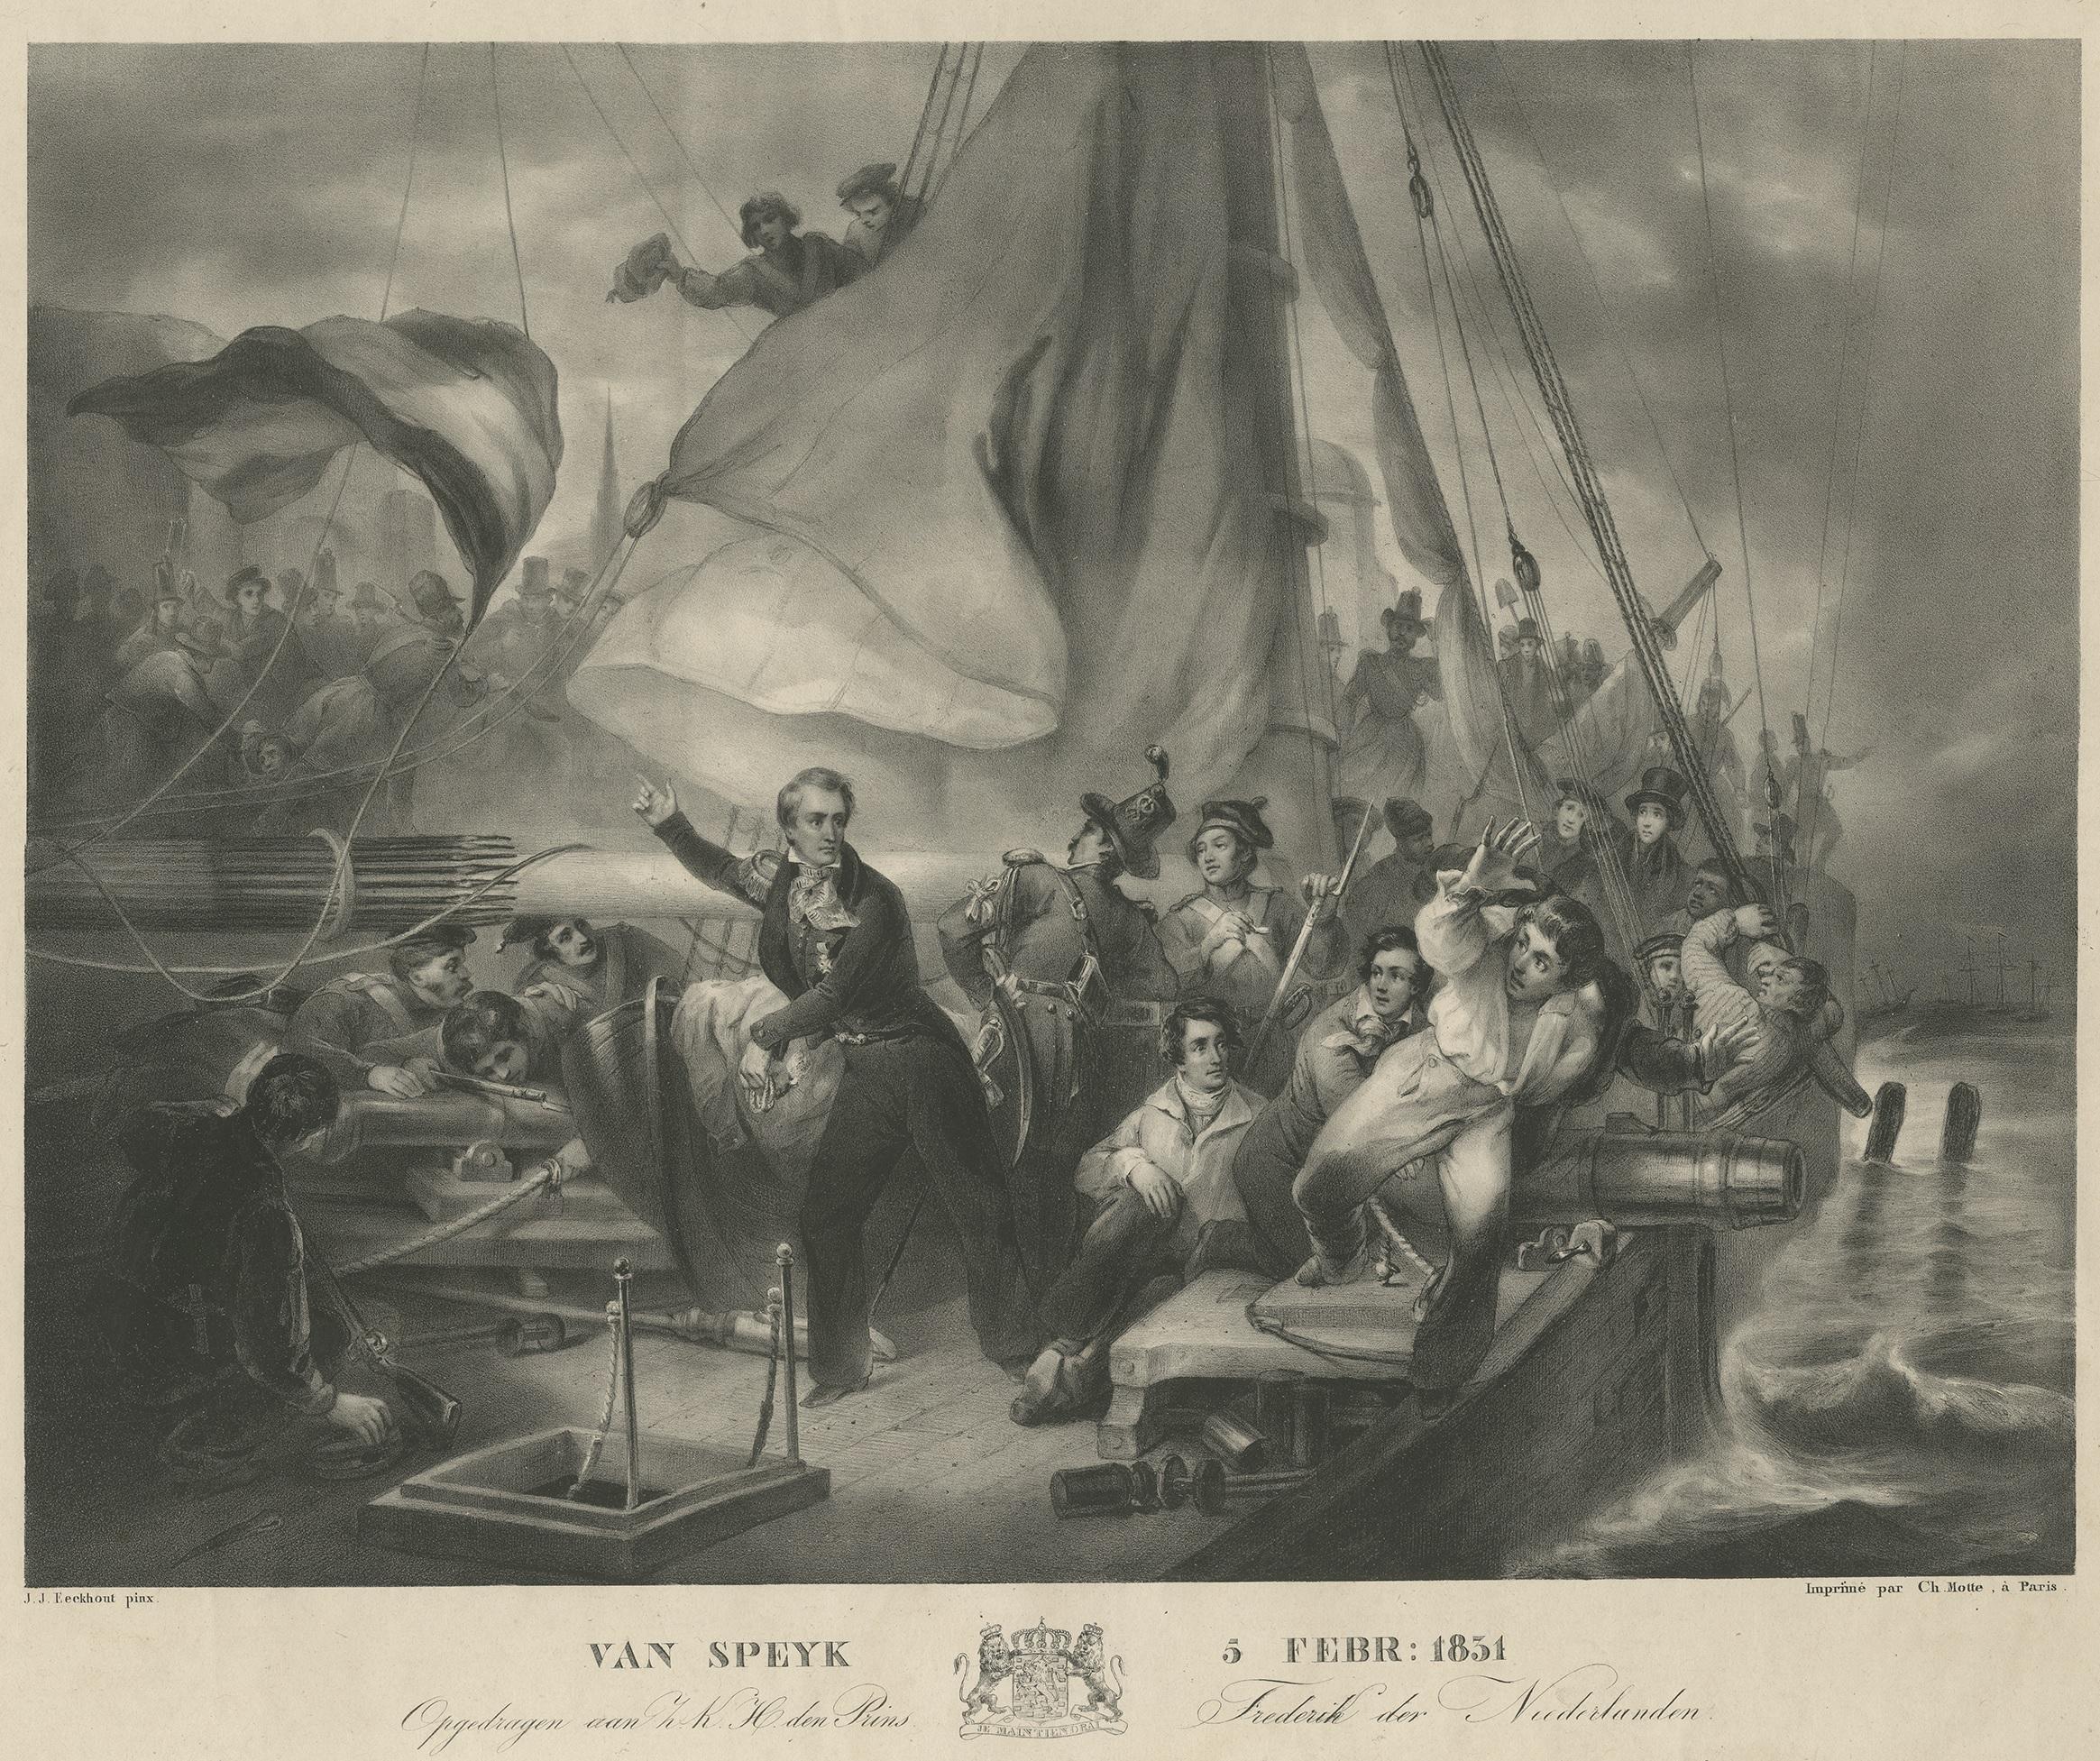 Antique print titled 'Van Speyk 5 Febr: 1831'. Large antique print on chine collé, it shows the overrun of Jan van Speijk's gunboat by Belgian insurgents, 5 February 1831. Jan van Speijk is about to throw the burning fuse into the hold, pointing his